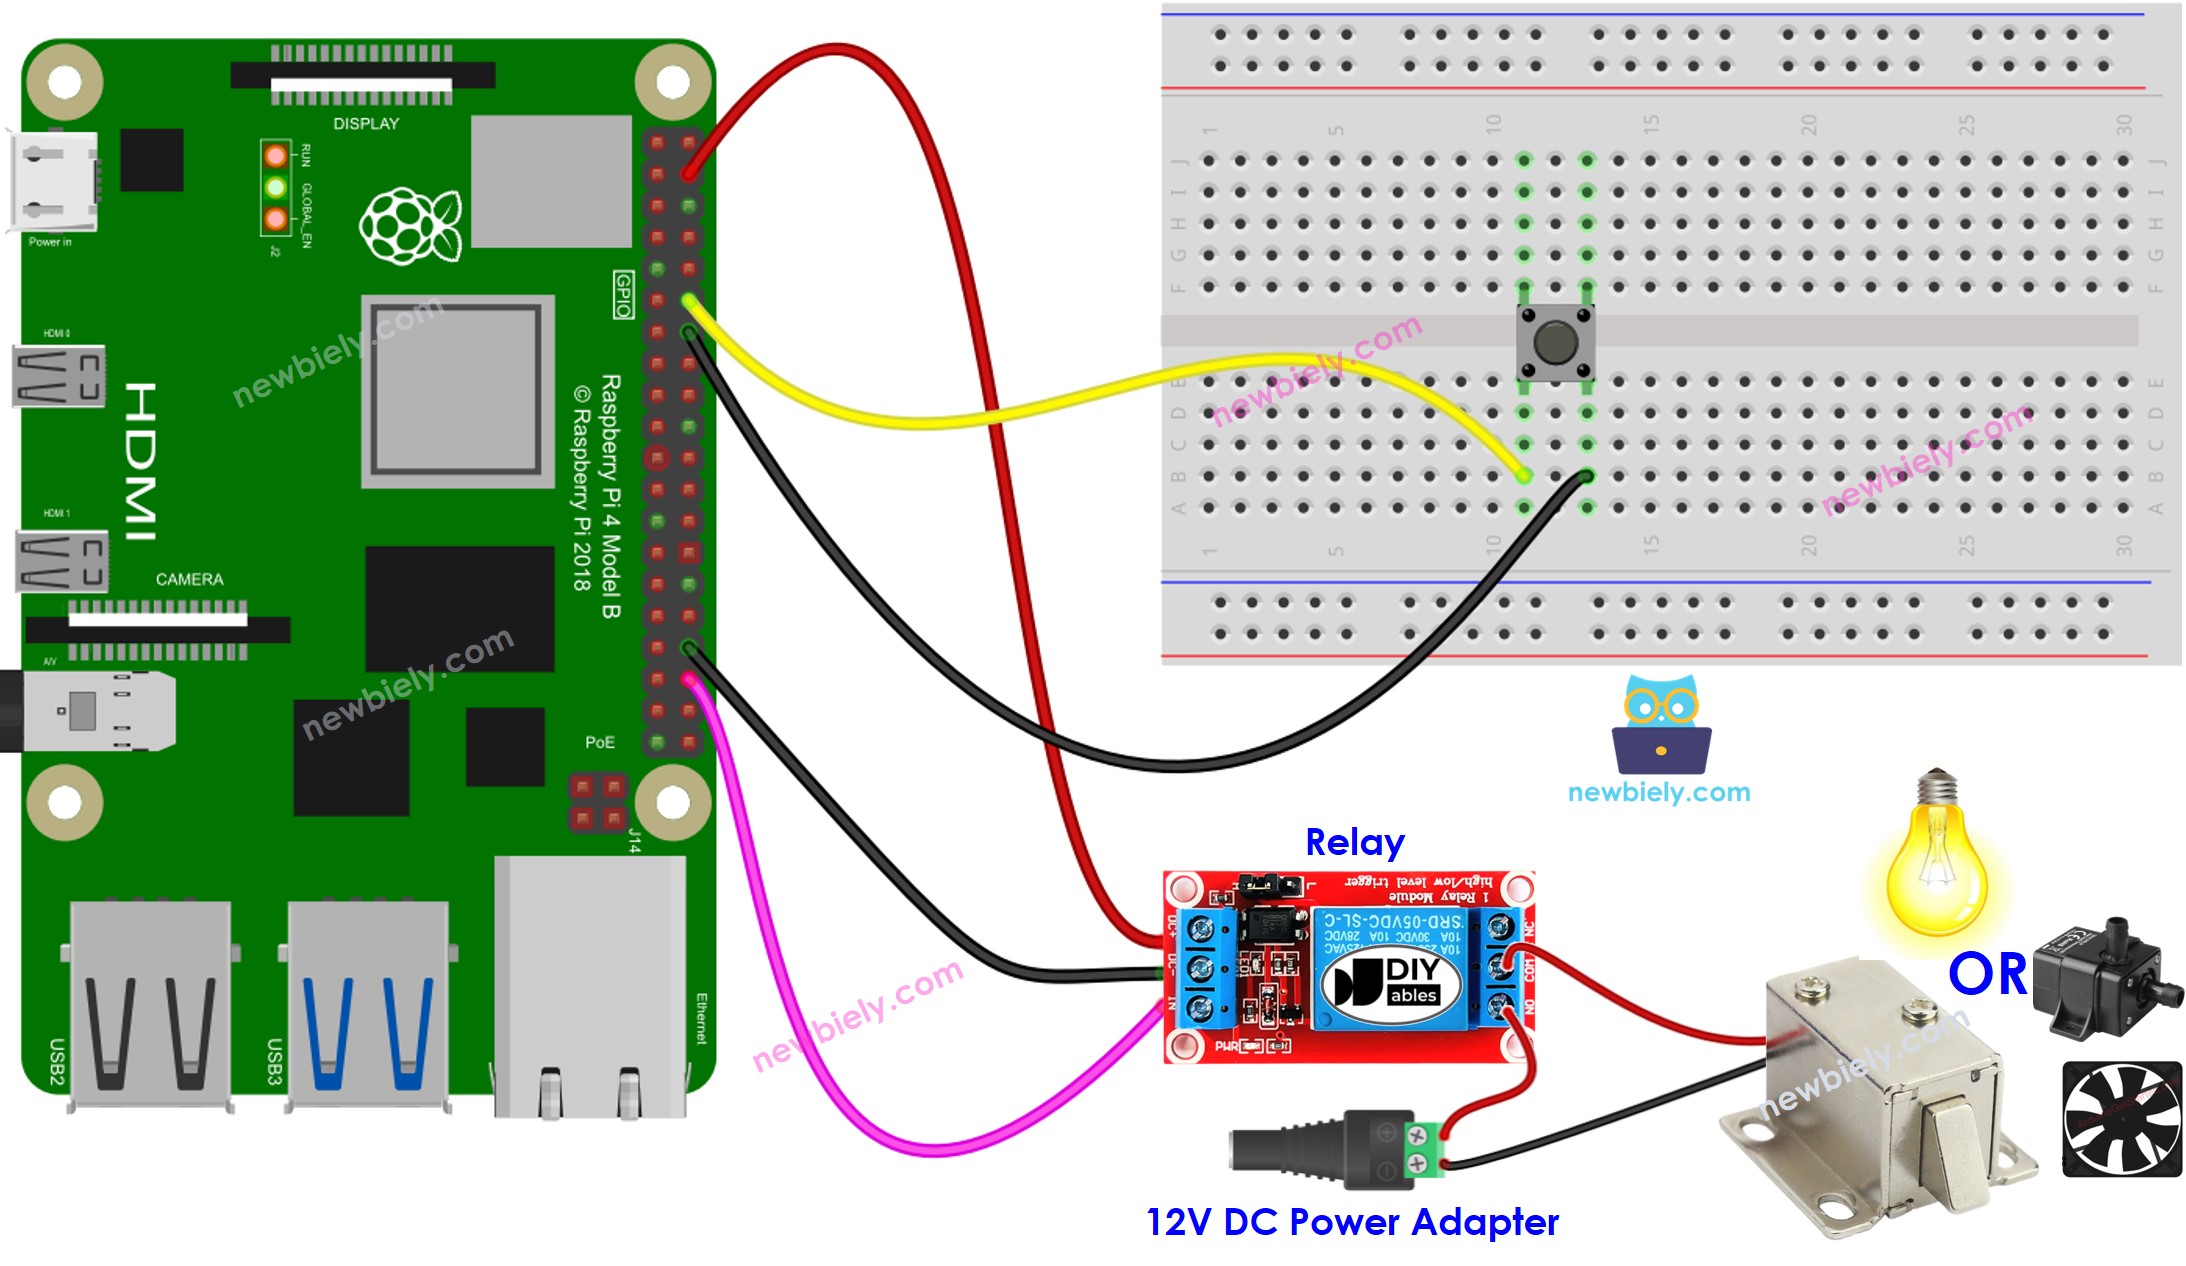 The wiring diagram between Raspberry Pi and Button relay